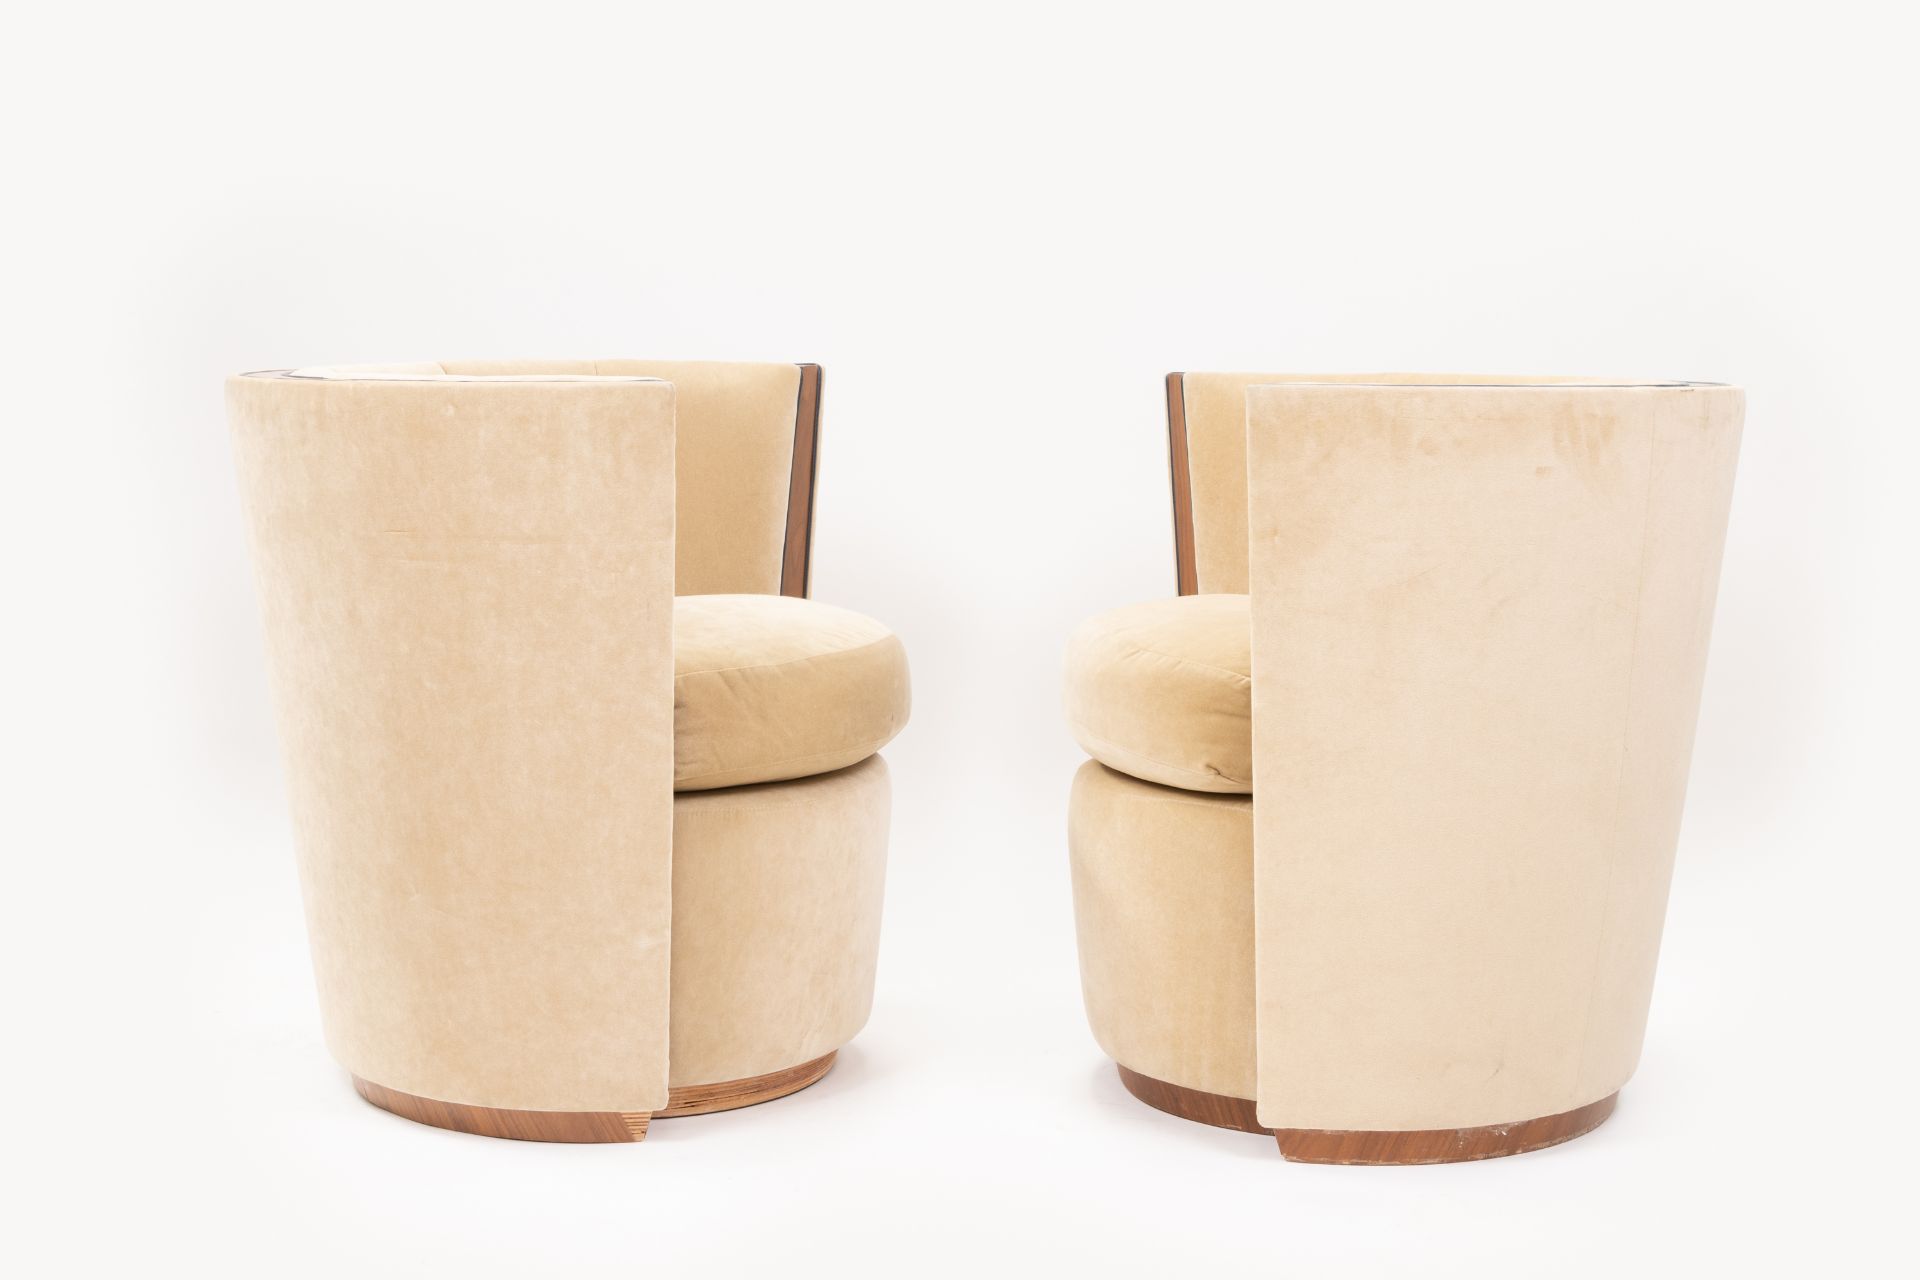 Pair of Bespoke Deco Tub Chairs Made for Claridge's by David Linley - Bild 3 aus 7